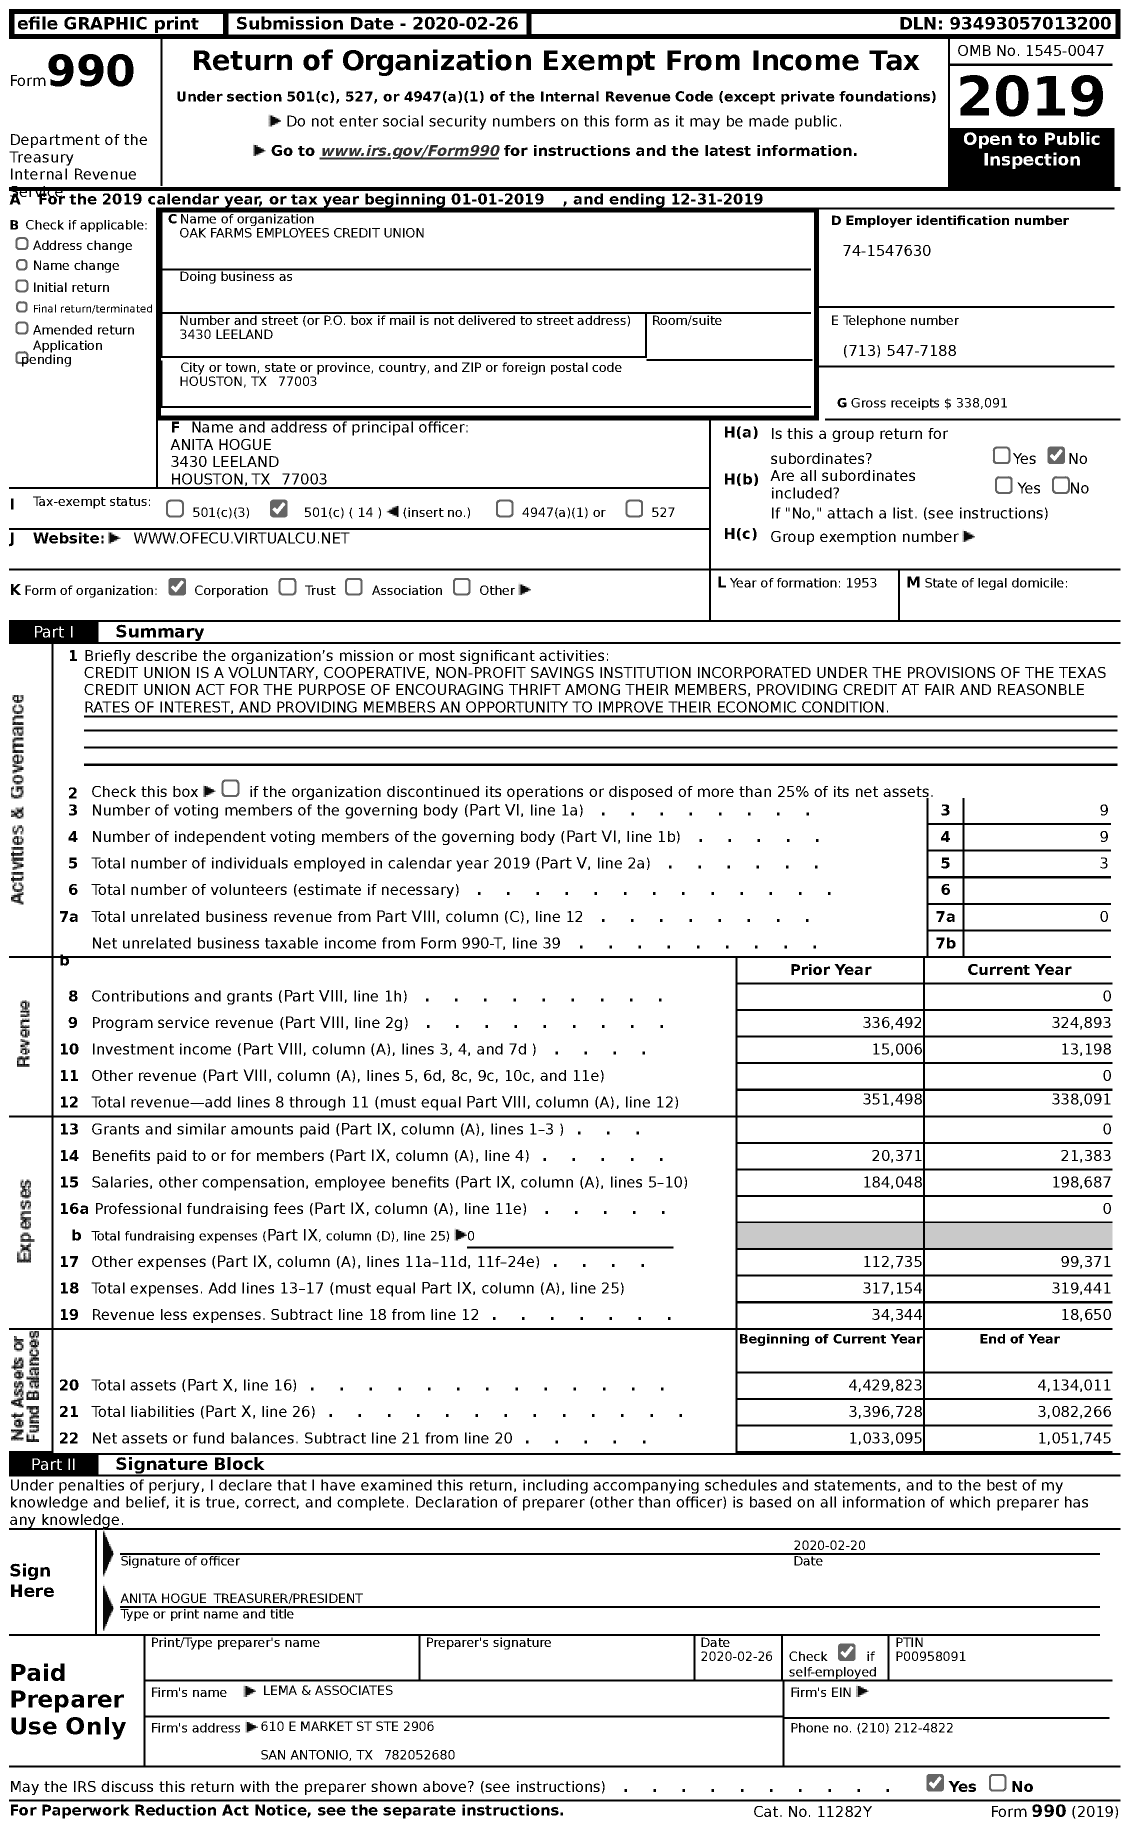 Image of first page of 2019 Form 990 for Oak Farms Employees Credit Union